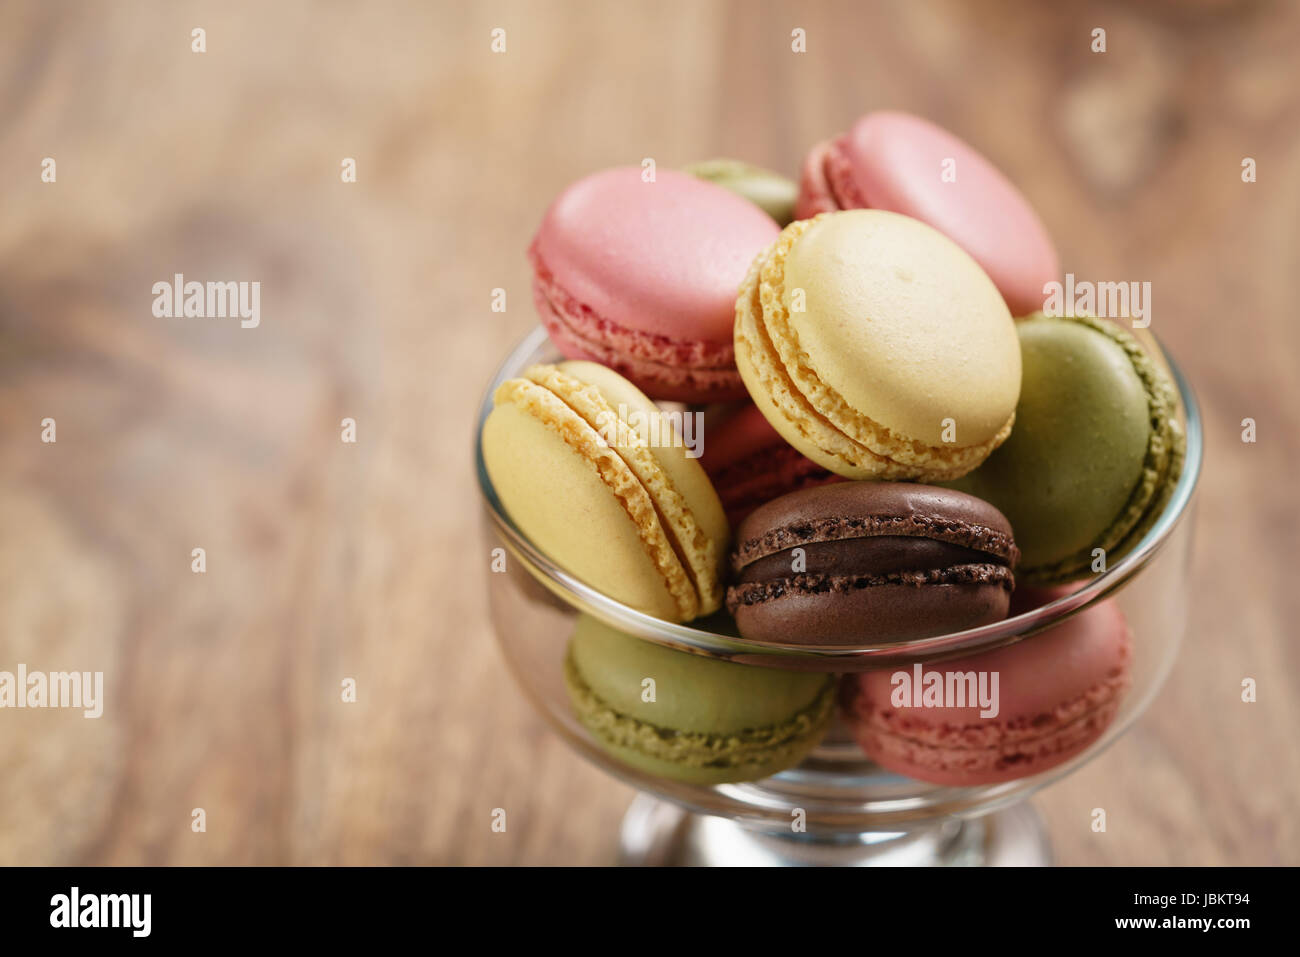 assorted macarons in glass bowl on wood table Stock Photo